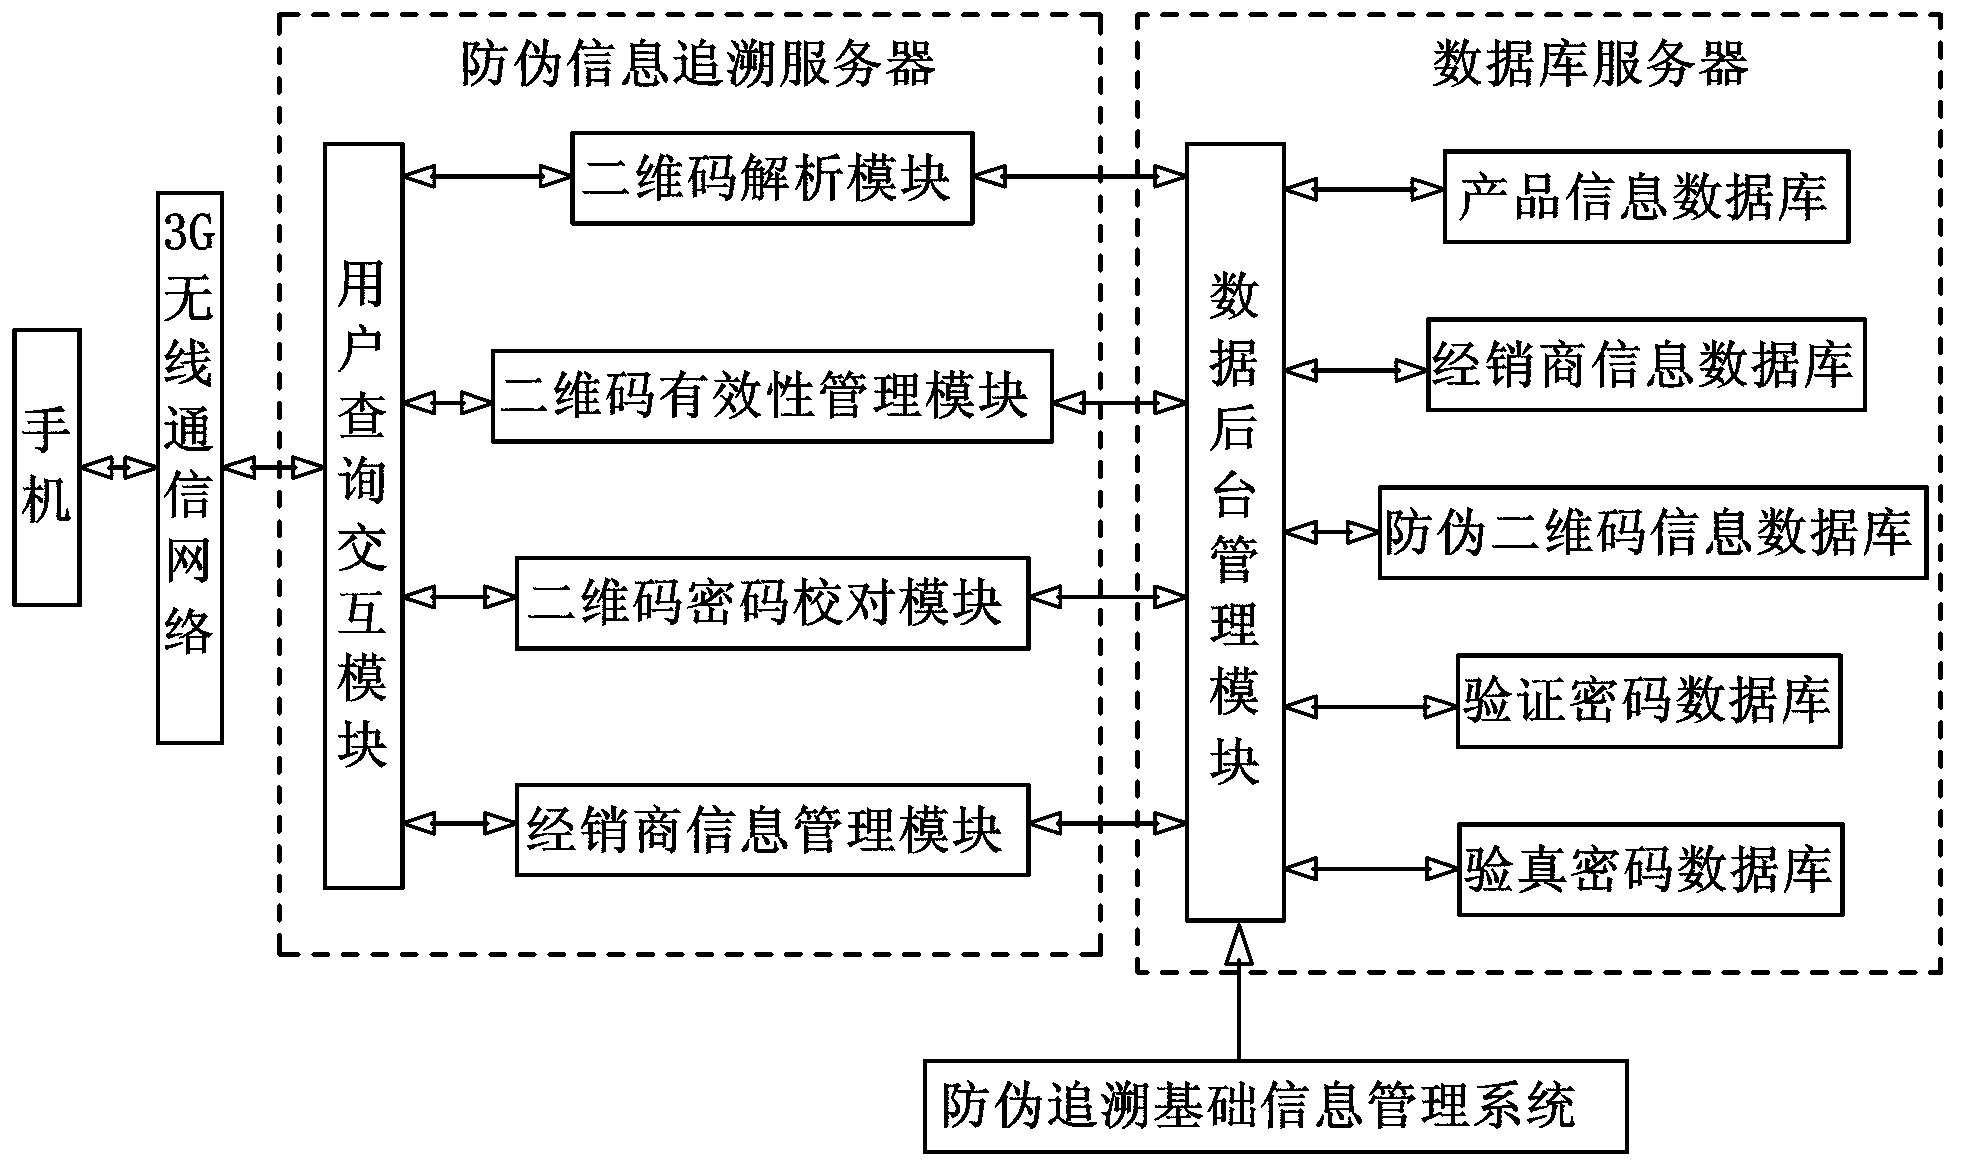 Two-dimensional code dynamic anti-fake information intelligent tracing system based on network